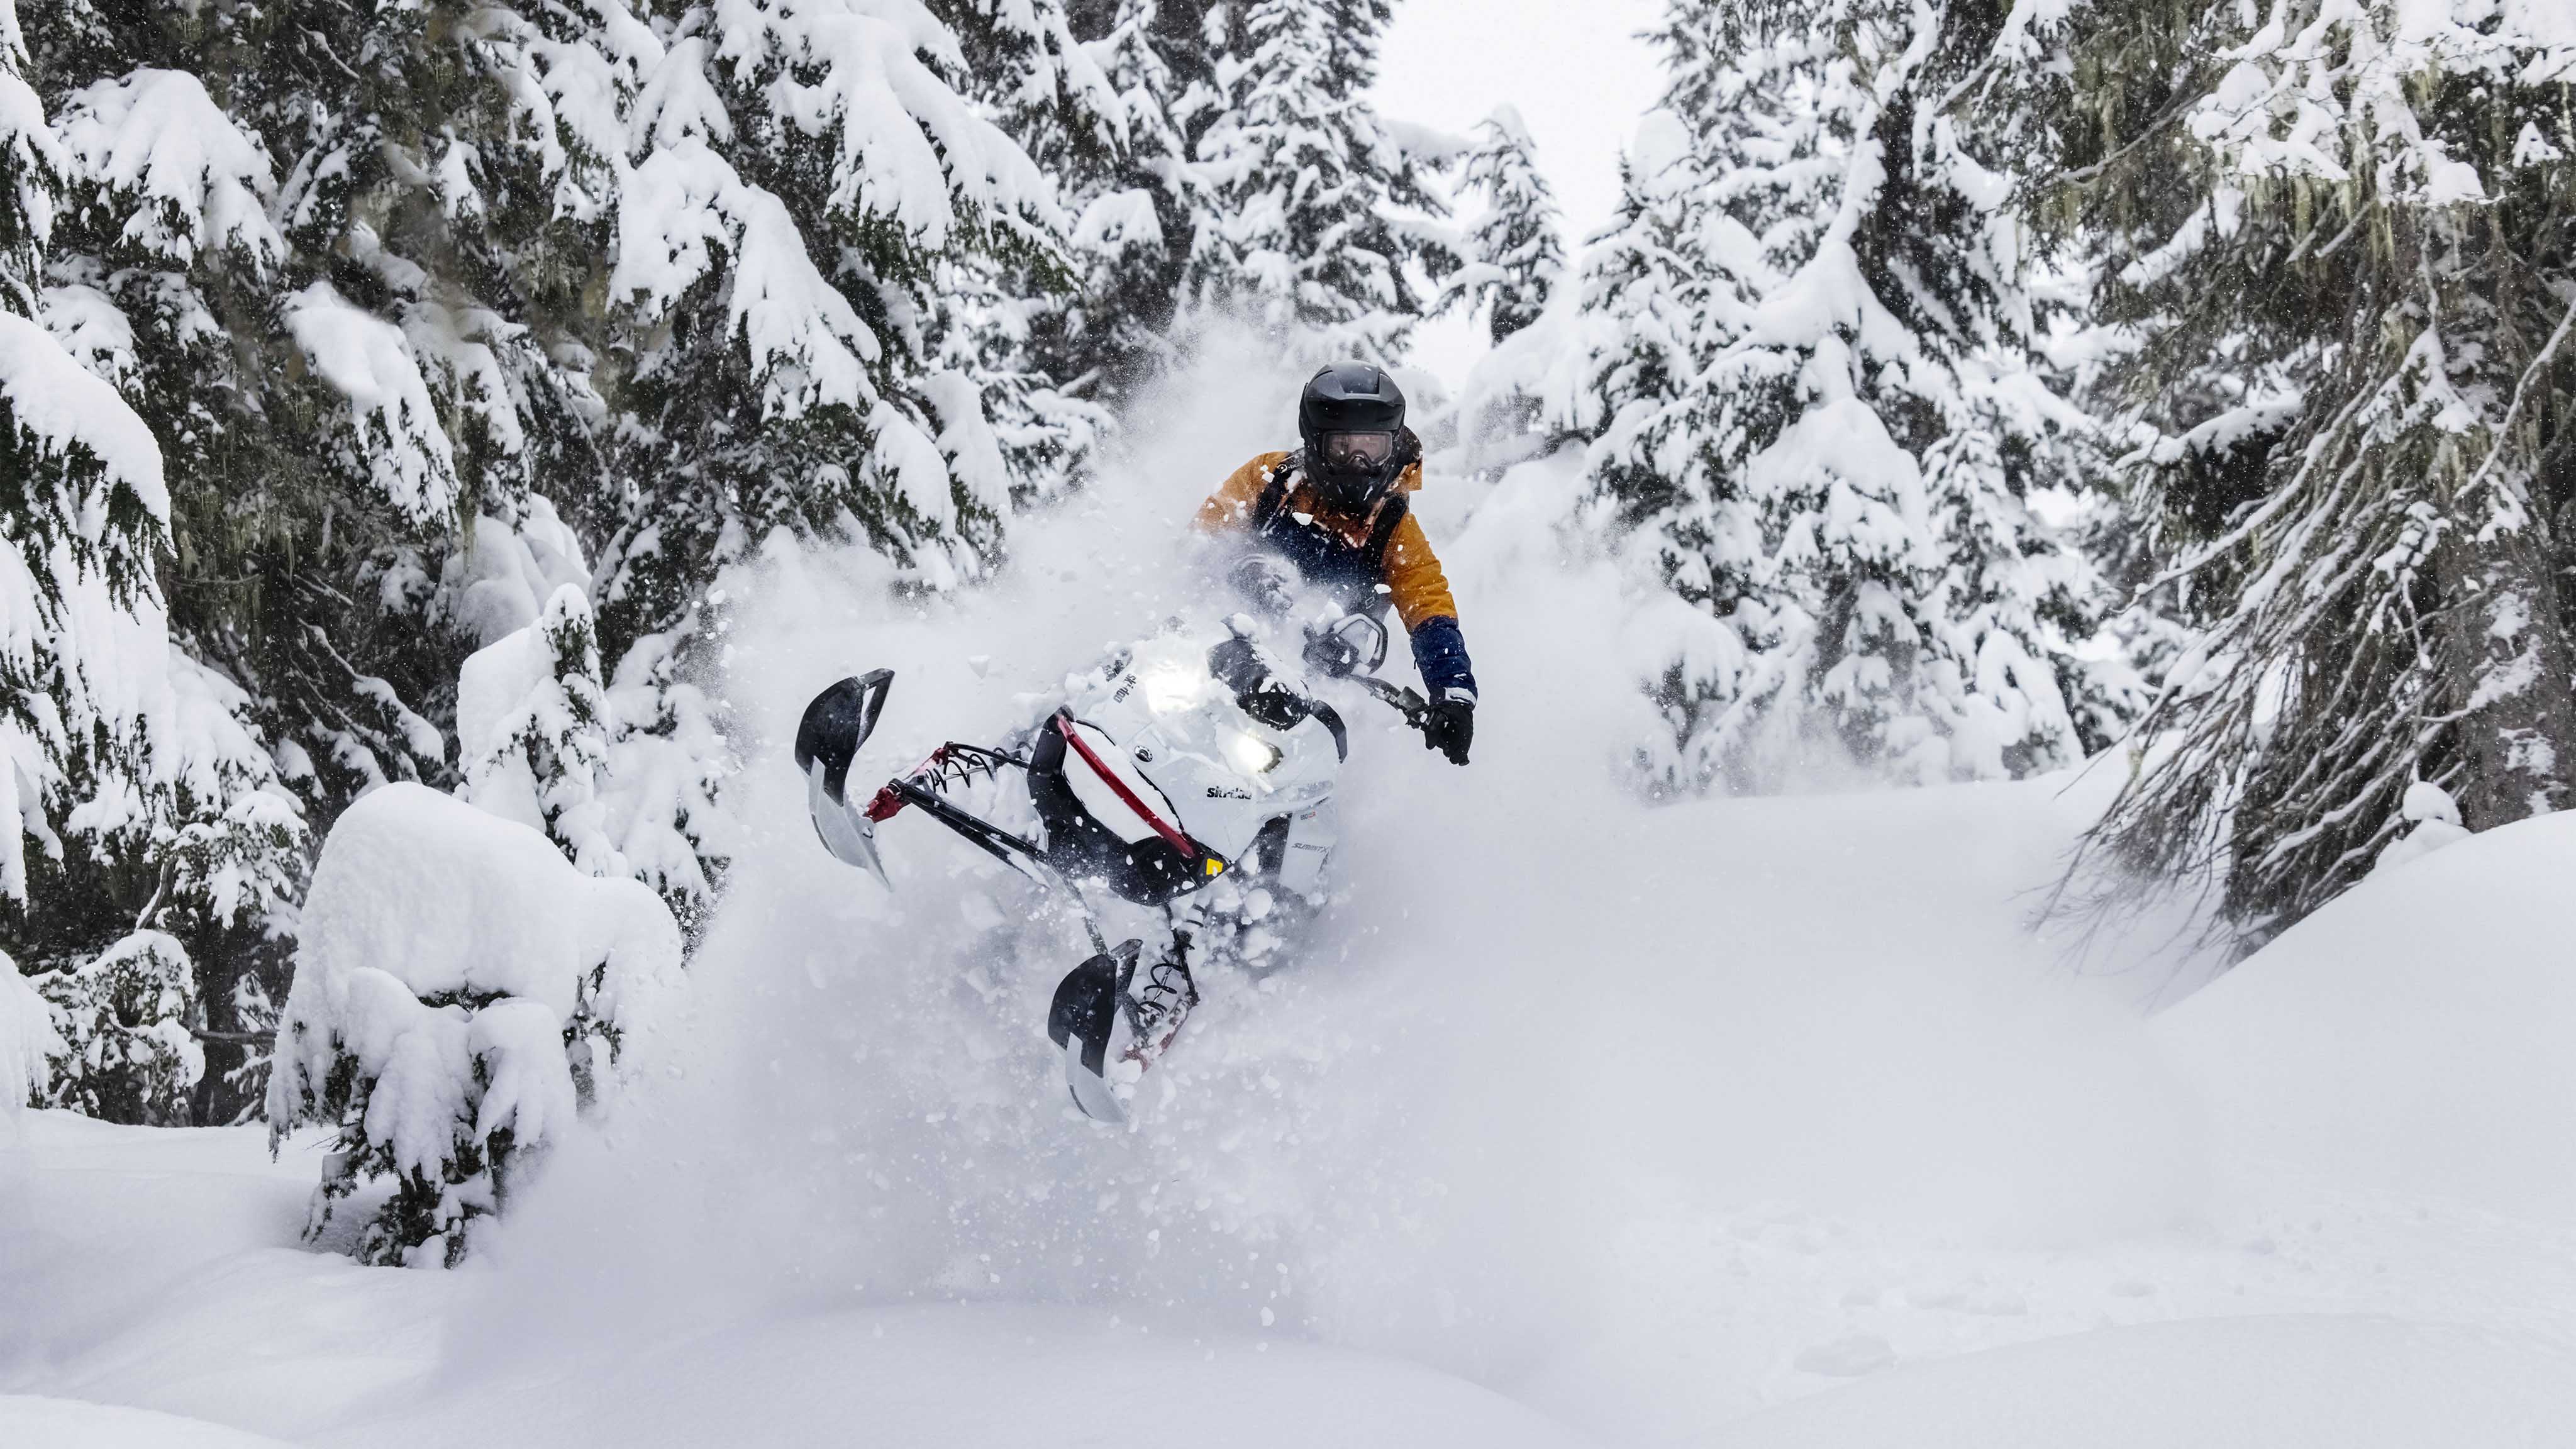 Man jumping in deep snow with a Ski-Doo Summit snowmobile